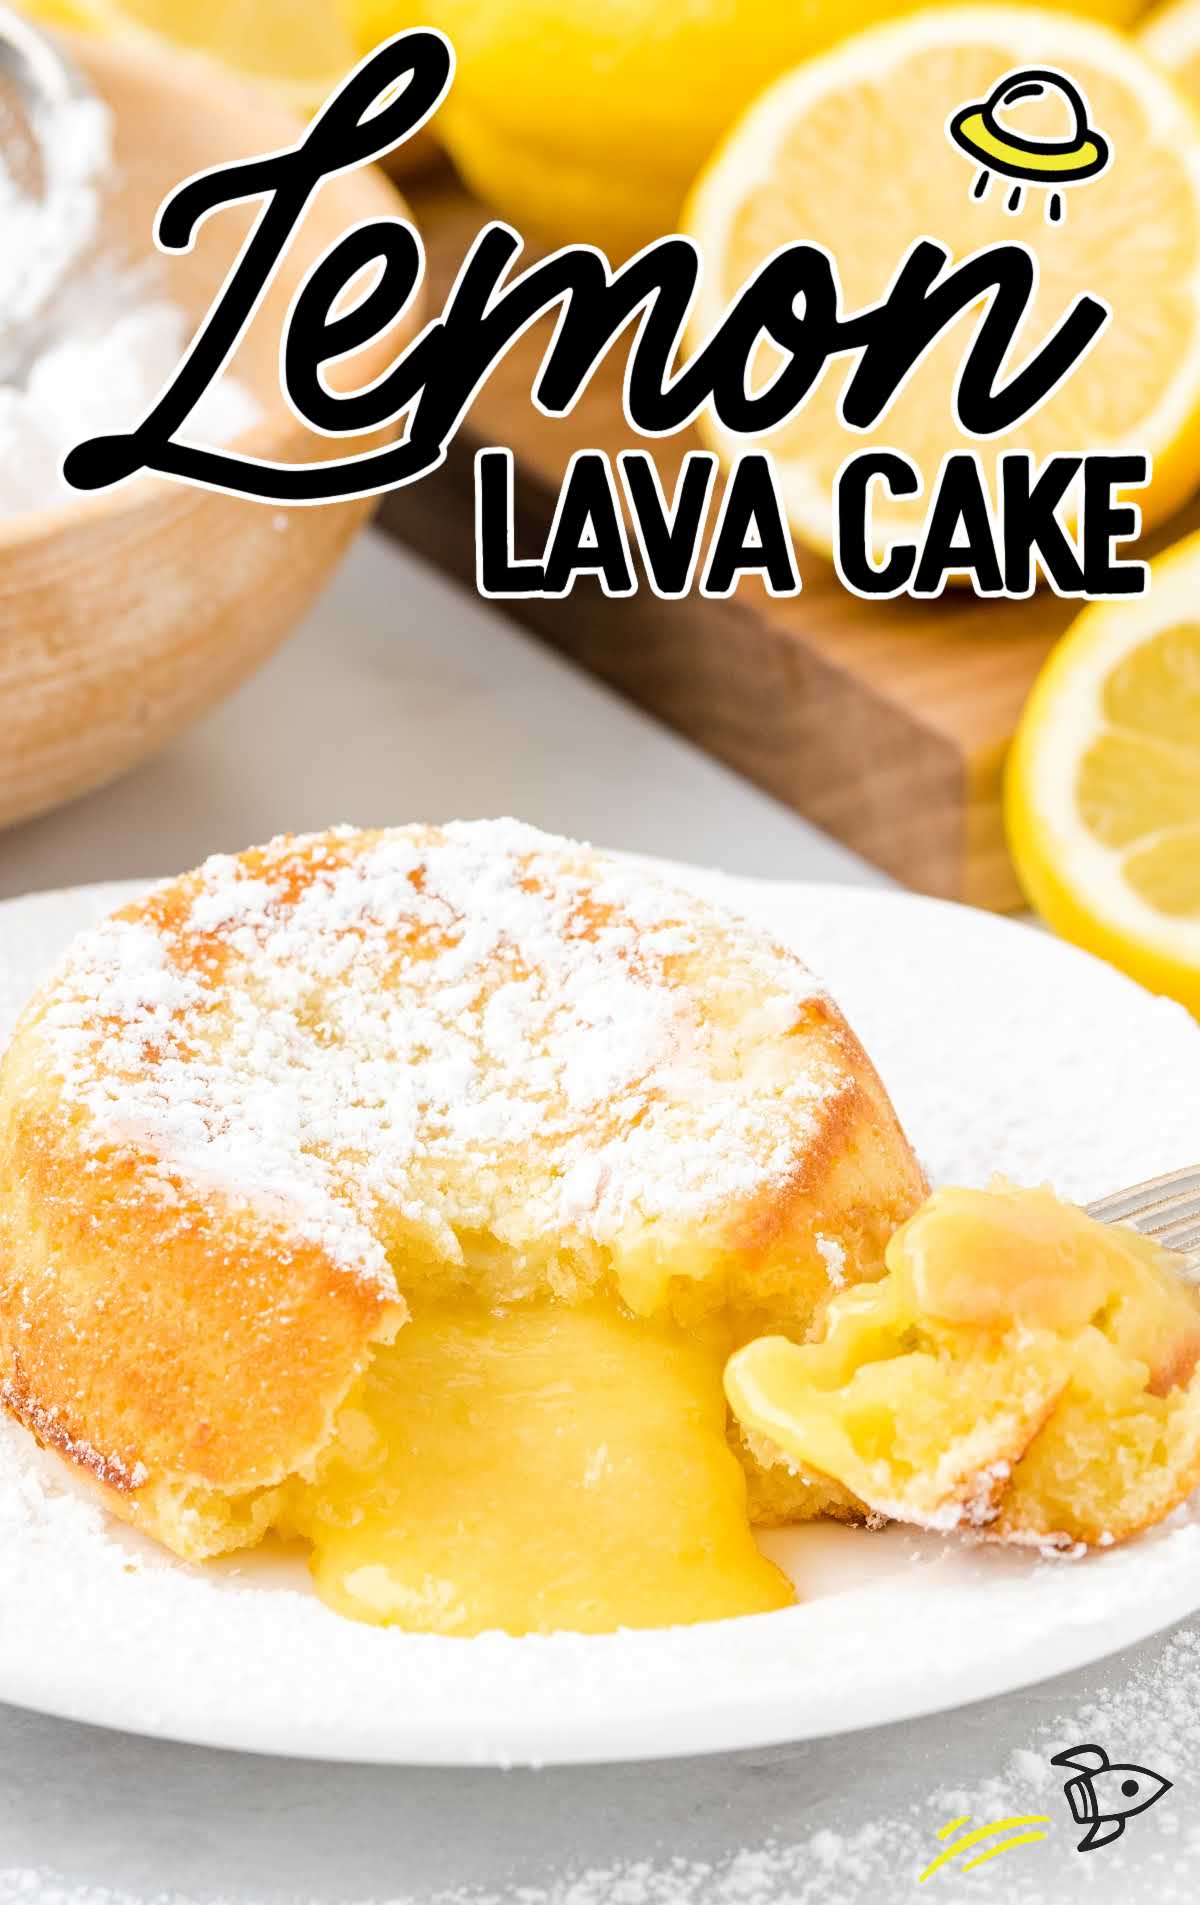 close up shot of a lemon lava cake dusted with powdered sugar with a bite taken out showing its inside lemon layers on a white plate